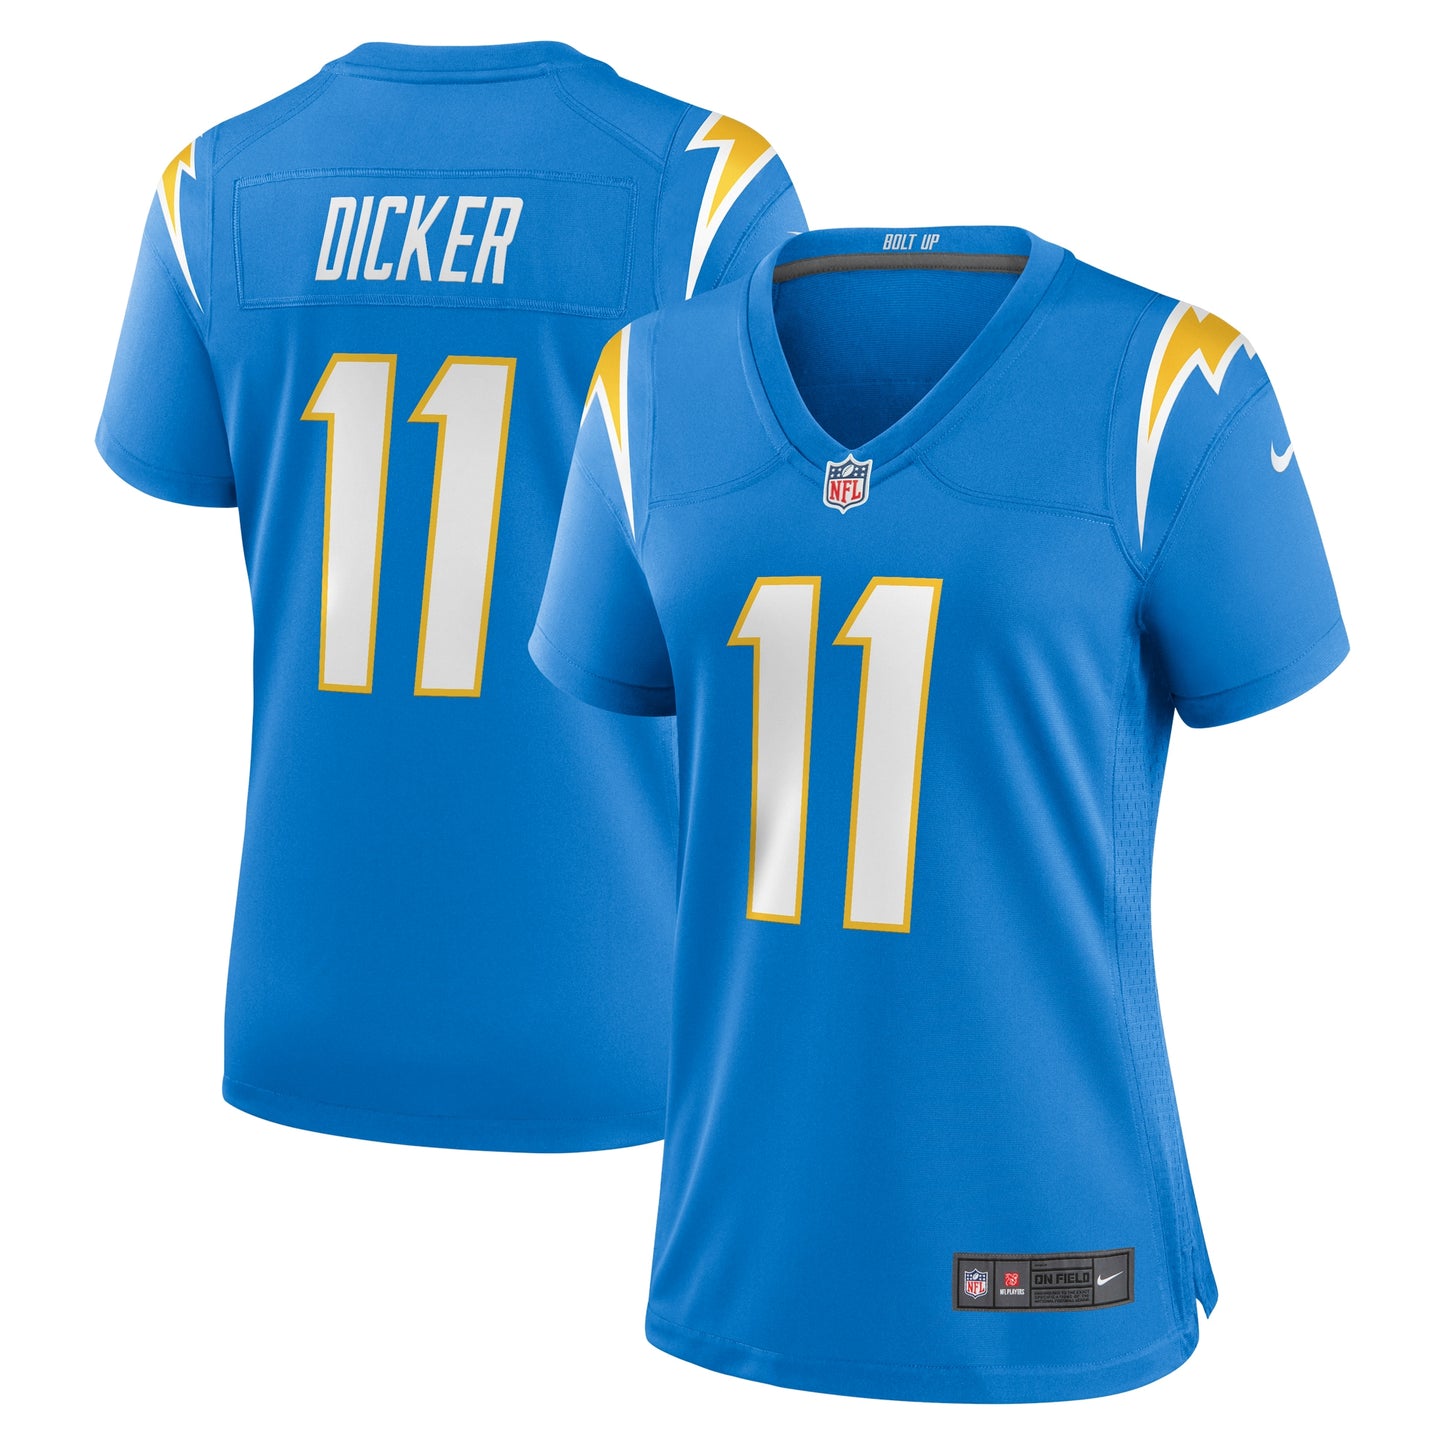 Cameron Dicker Los Angeles Chargers Nike Women's Game Jersey - Powder Blue